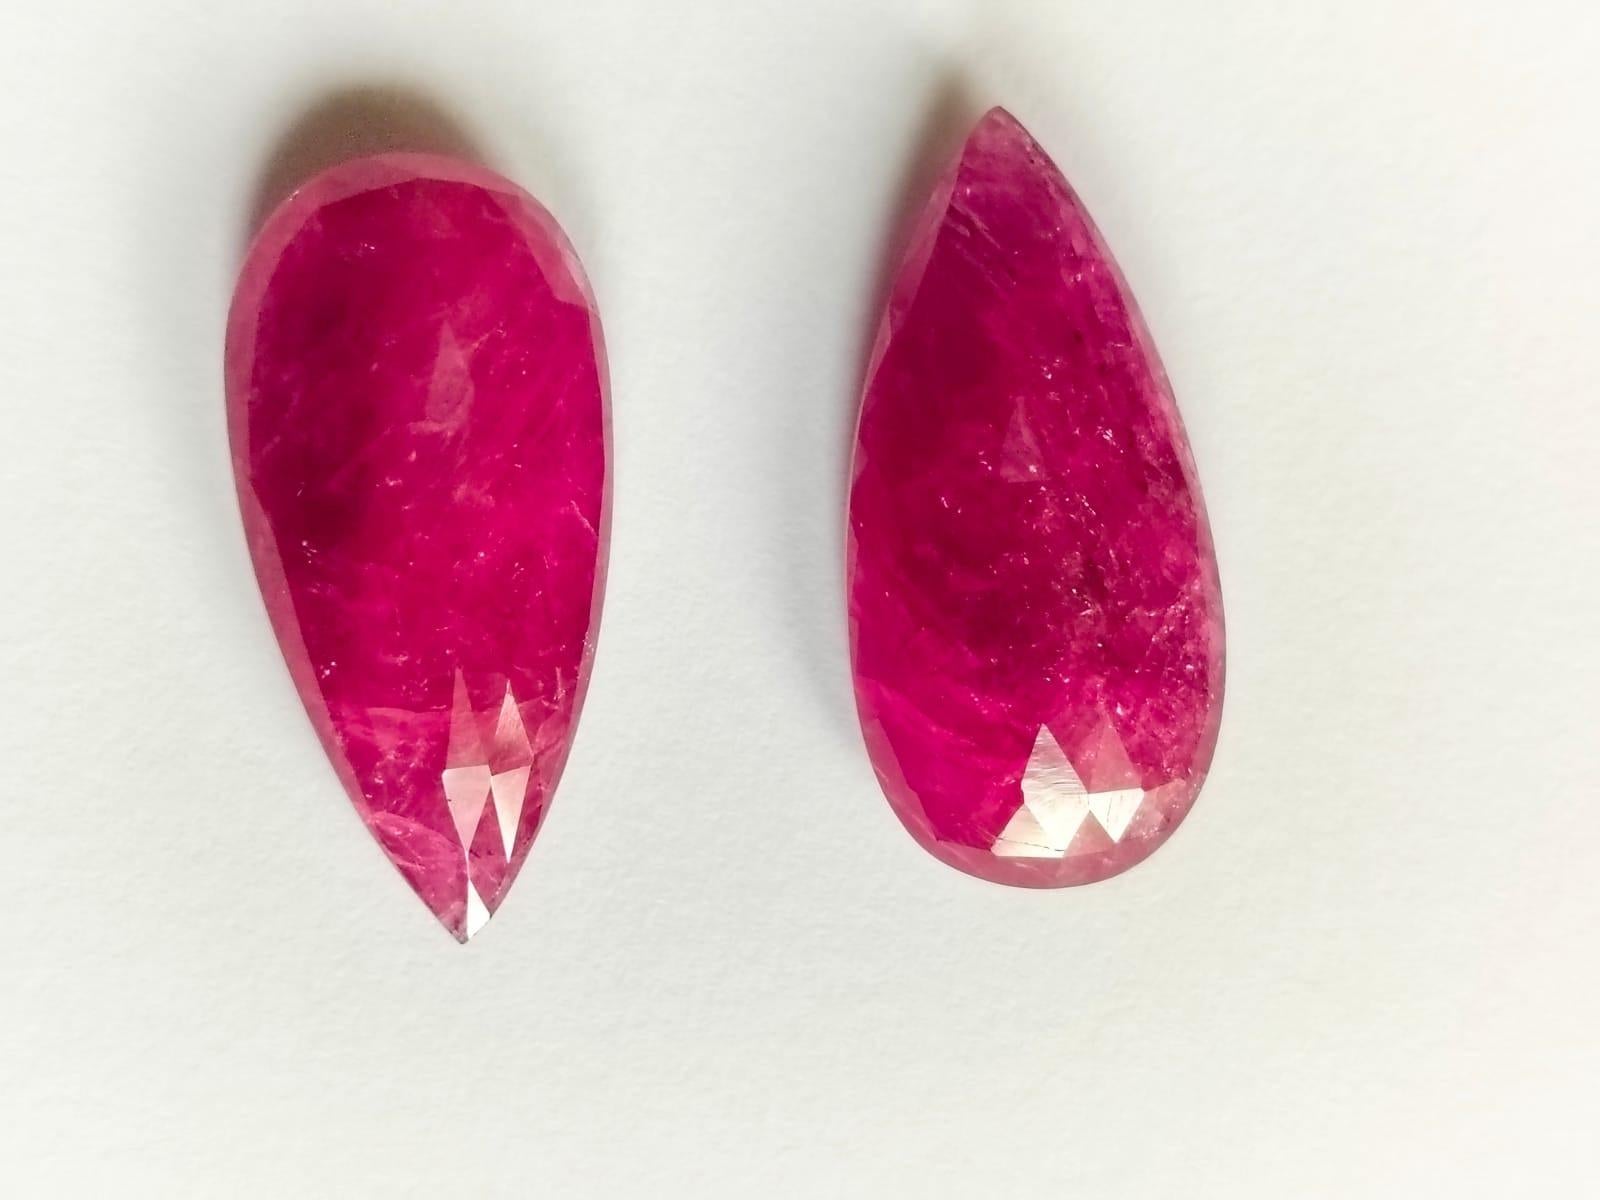 Natural Ruby Faceted Cabochon Pair Gemstone.
44.22 Carat with a elegant Red color and excellent clarity. Also has an excellent fancy Faceted Pan Cabochon with ideal polish to show great shine and color . It will look authentic in jewelry. The